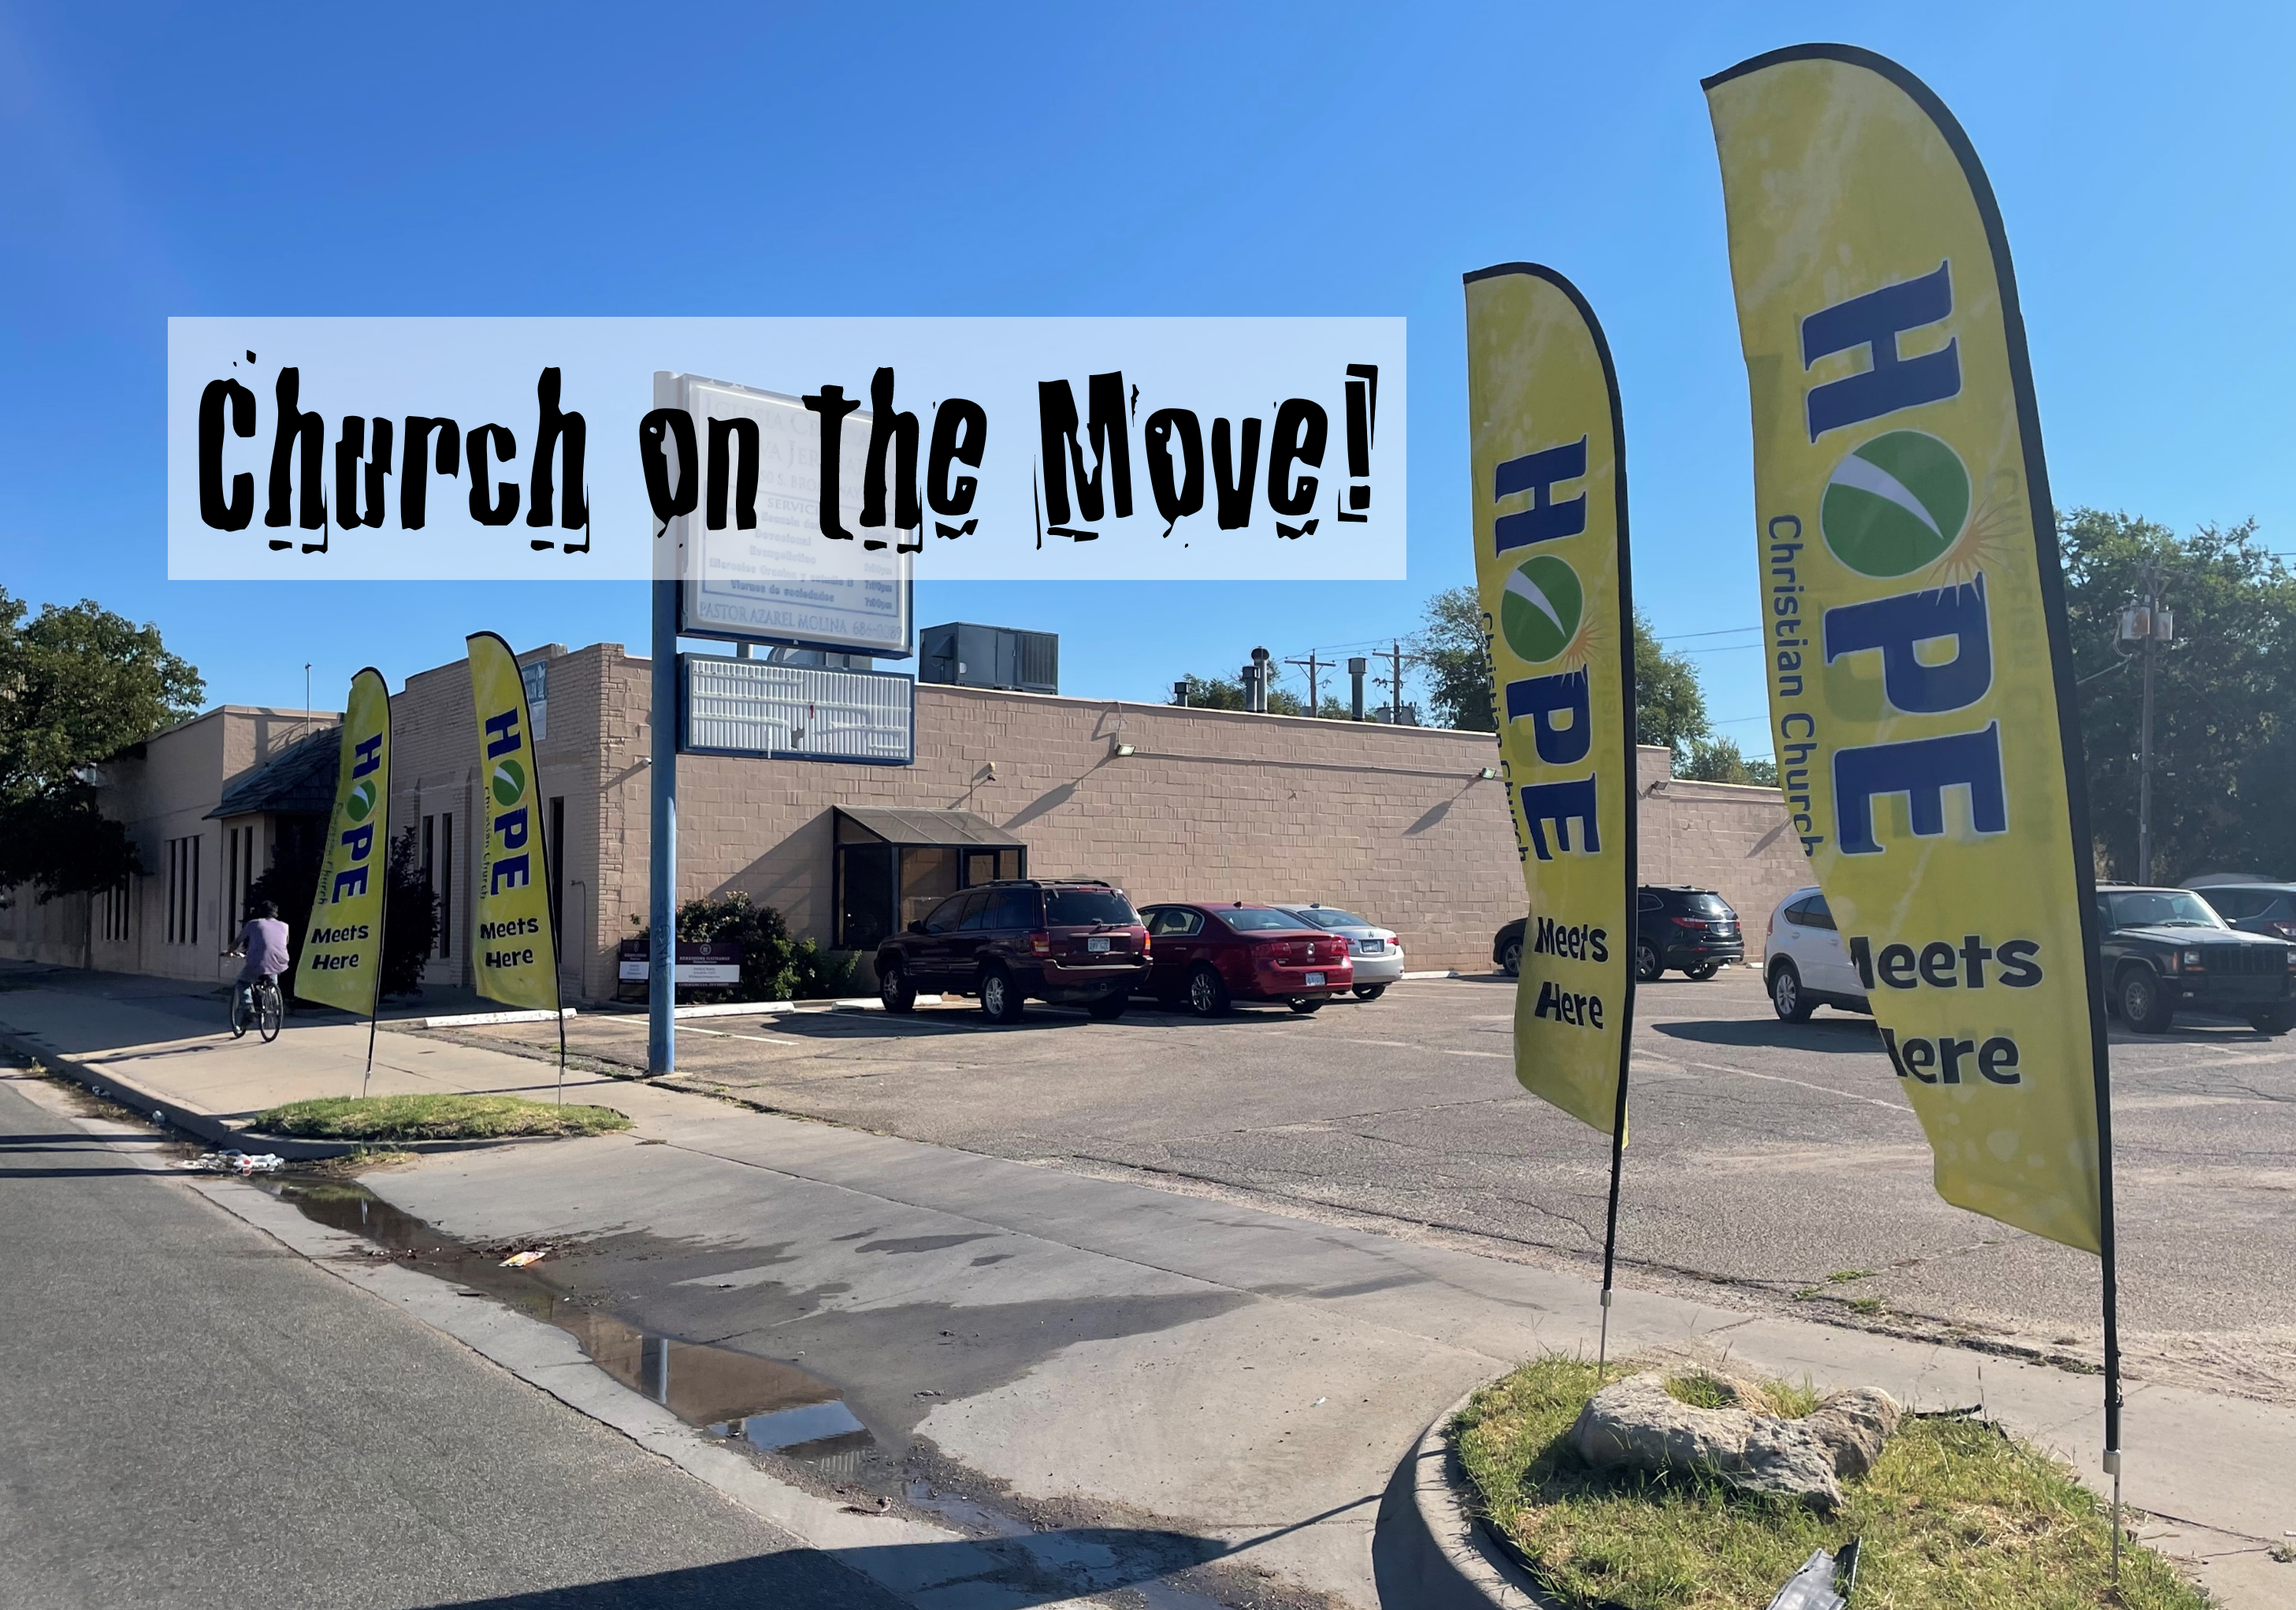 The Church on the Move